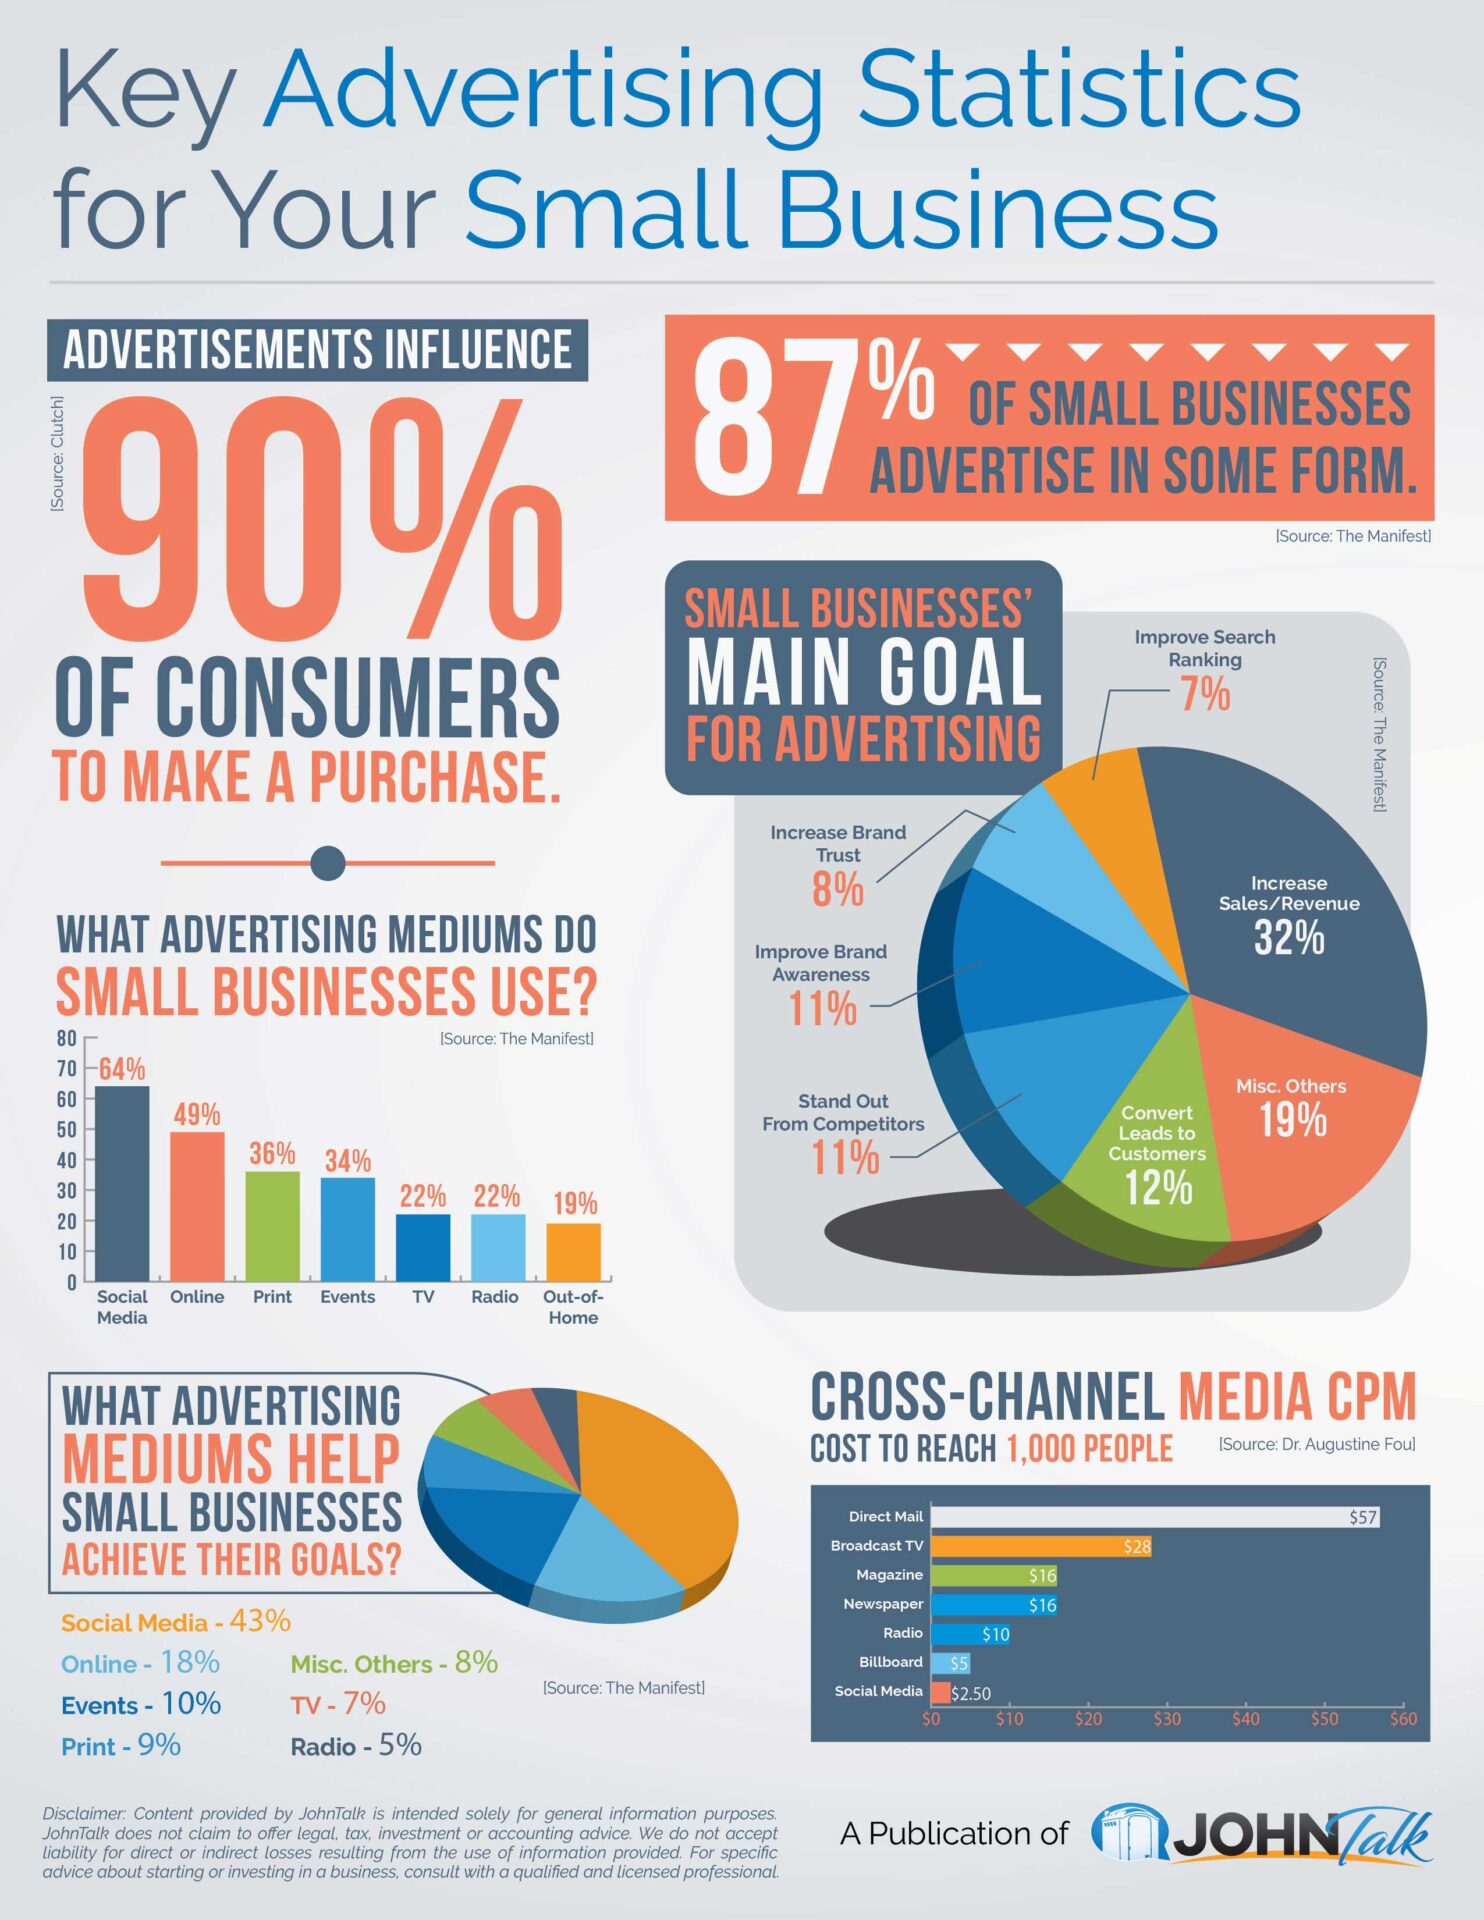 17 Best images about Small Business Infographics on Pinterest | Digital marketing, Marketing and ...